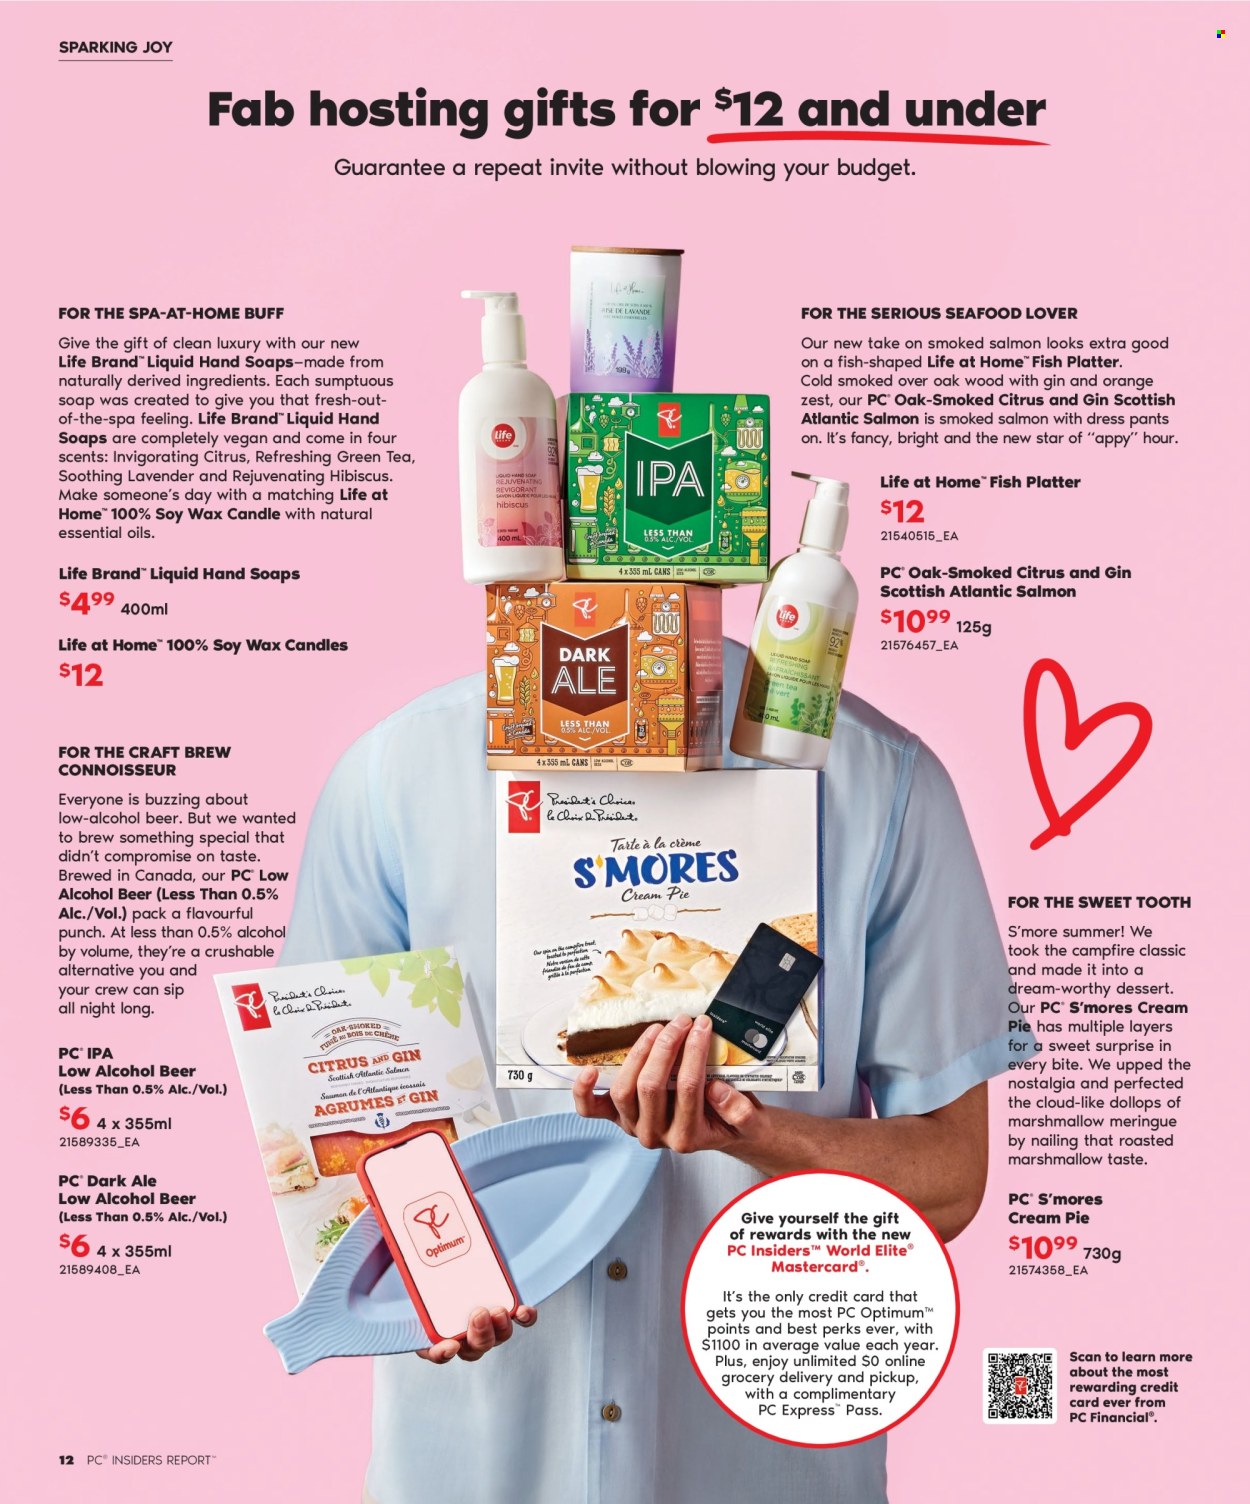 thumbnail - Real Canadian Superstore Flyer - Sales products - cream pie, dessert, meringue, salmon, smoked salmon, seafood, marshmallows, green tea, tea, gin, punch, beer, IPA, pants, Fab, Joy, hand soap, soap, platters, candle, Optimum, Campfire, lavender. Page 12.